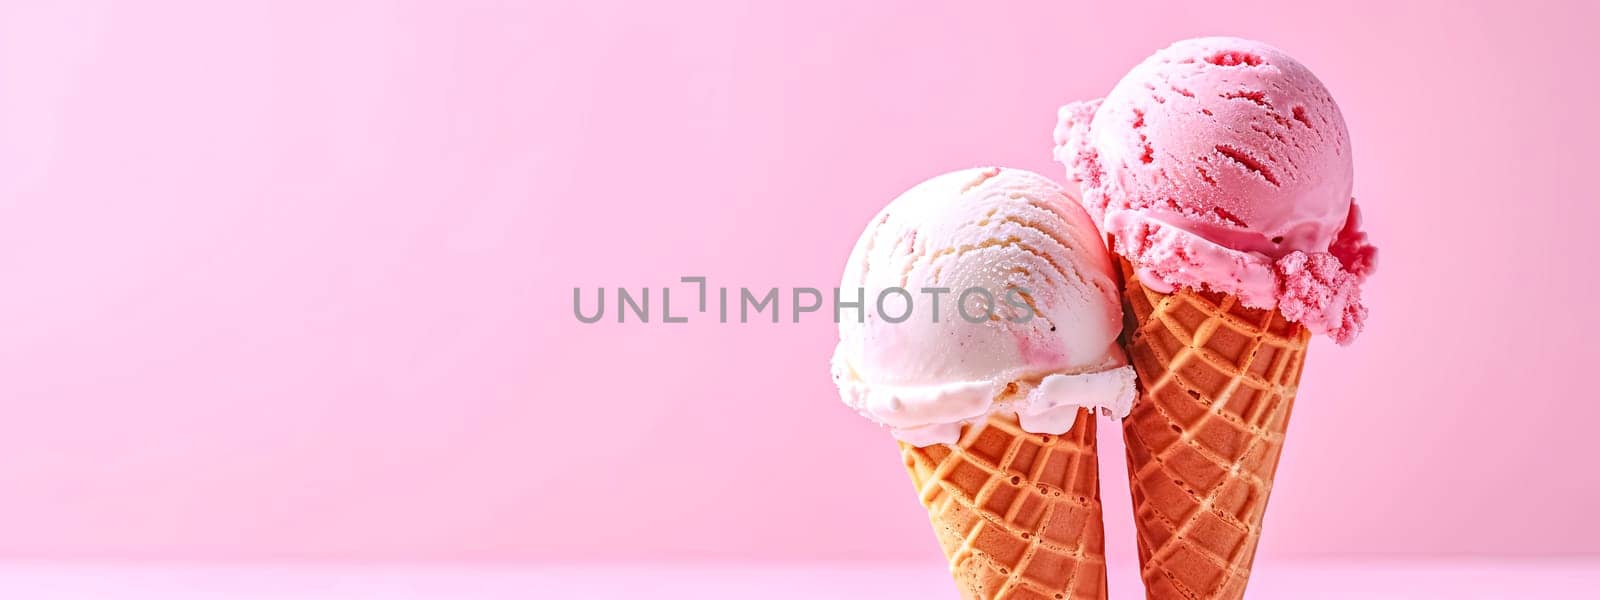 Still life photography of peach ice cream in a waffle cone on a magenta background. by Edophoto